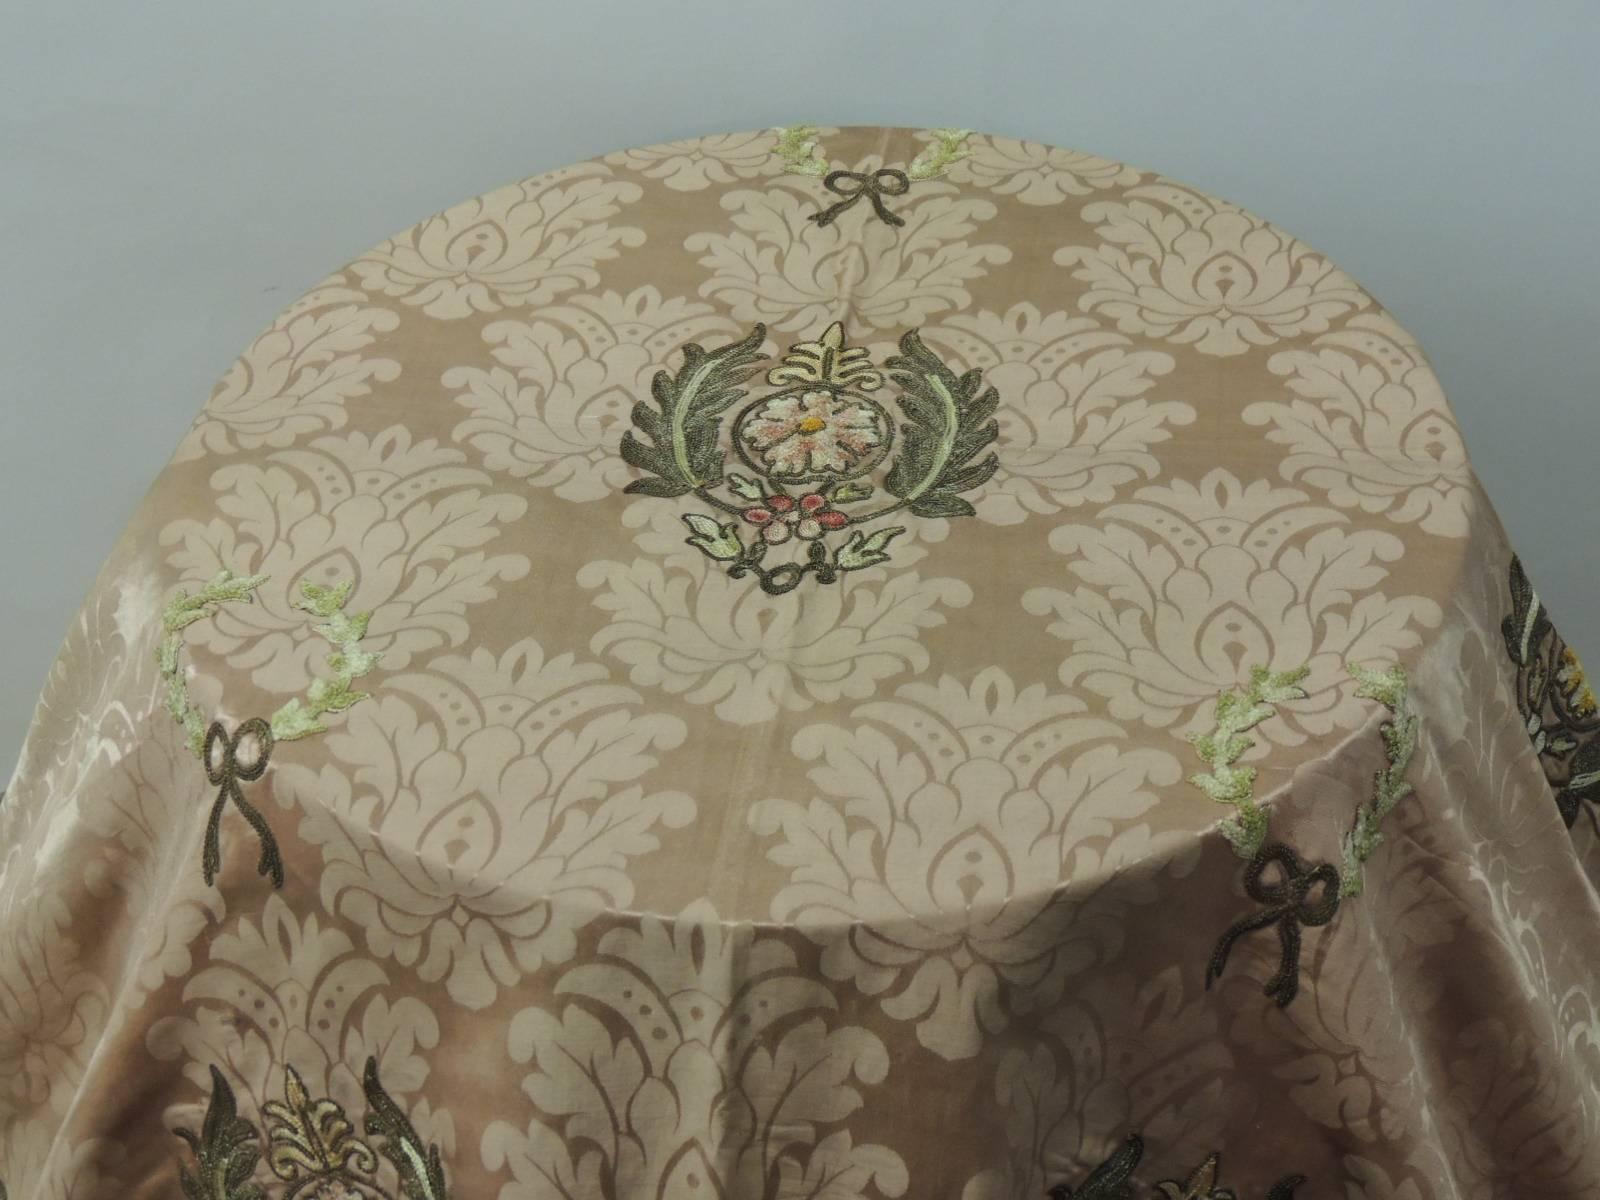 Large square table/bed cover damask textile panel.
19th century Italian hand embroidered on silk large square table and/or bed cover textile panel with copper-orange Damask under cloth and framed with antique silk velvet with a pattern that repeats